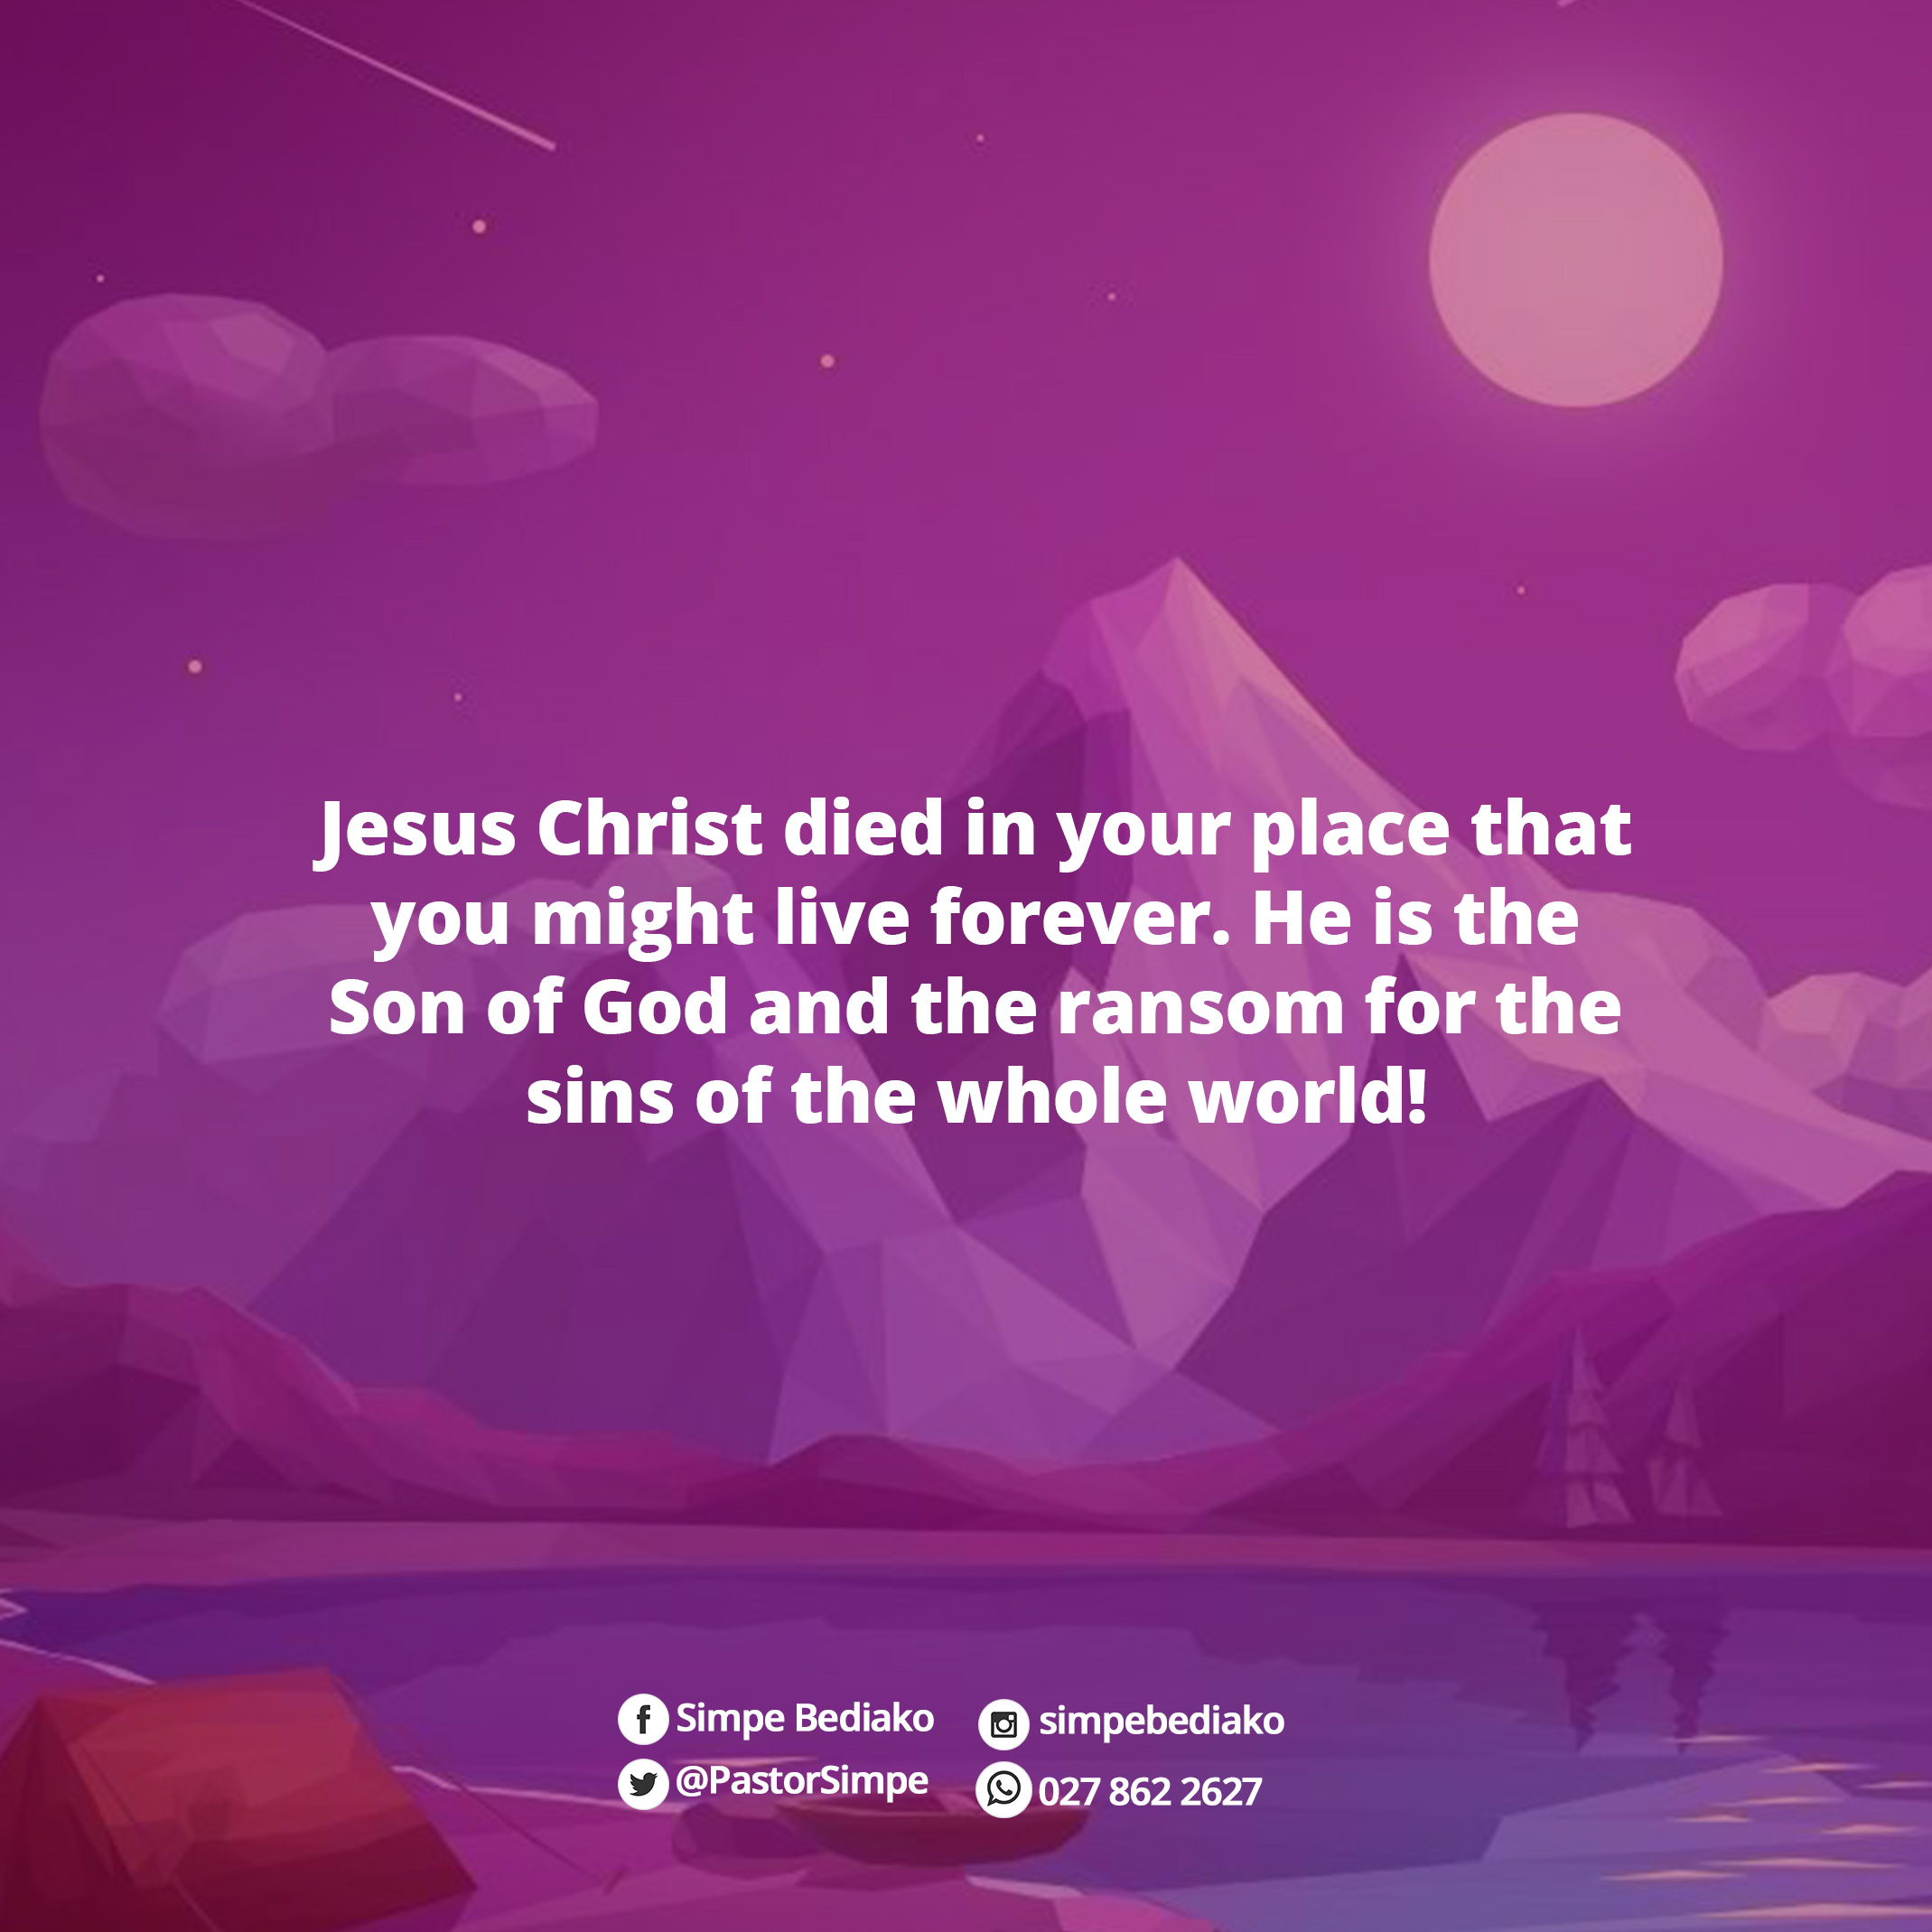 Jesus Christ died in your place that you might live forever. He is the Son of God and the ransom for the sins of the whole world!